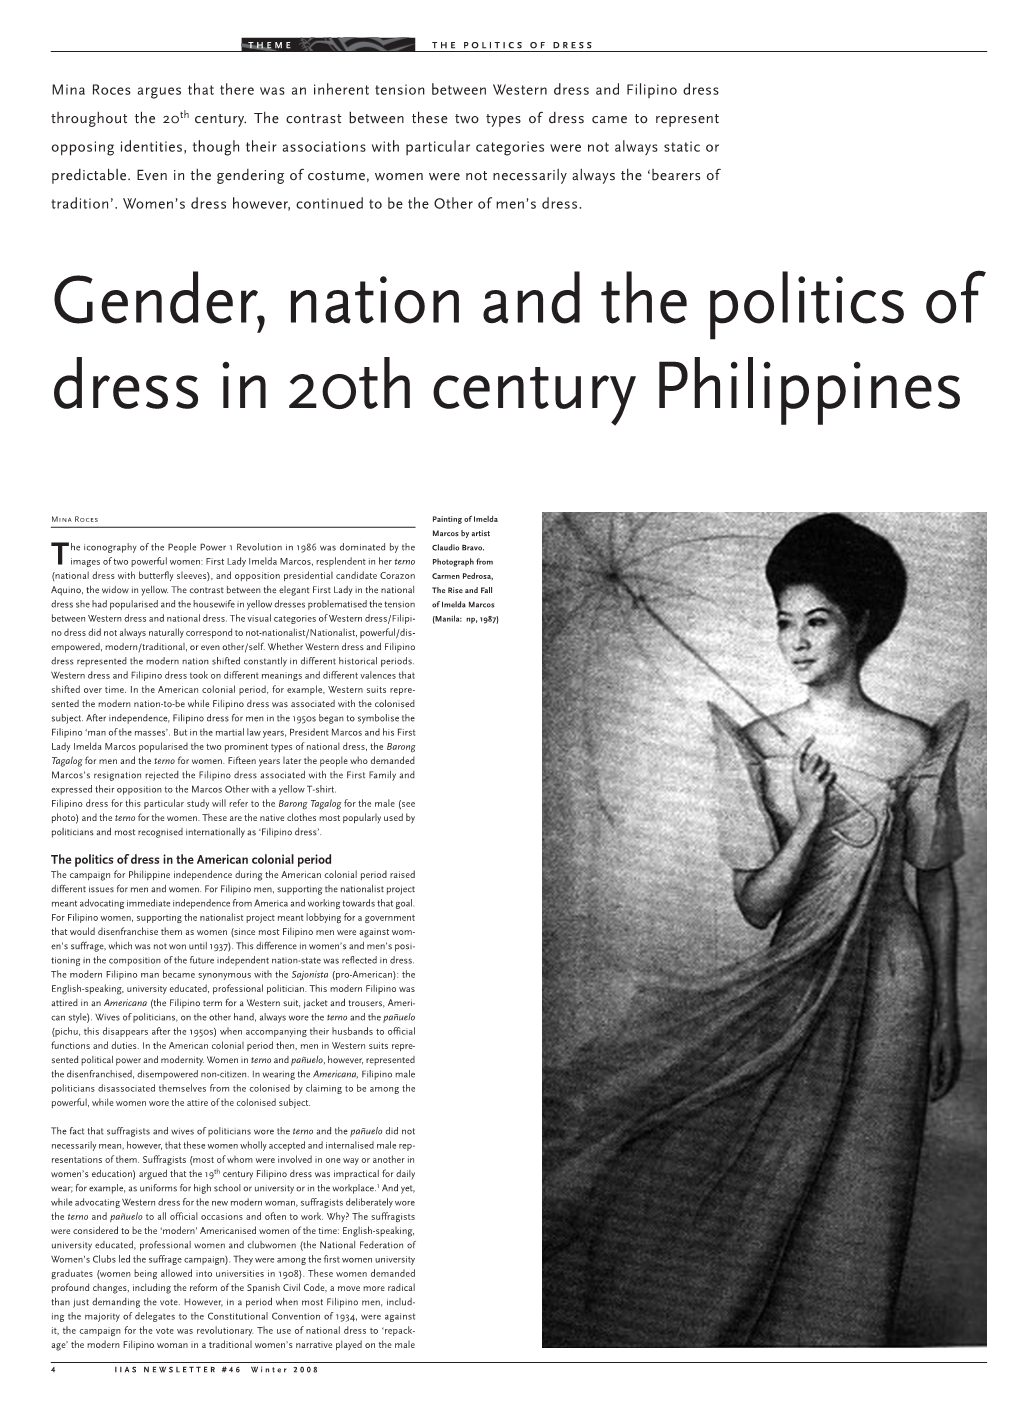 Gender, Nation and the Politics of Dress in 20Th Century Philippines